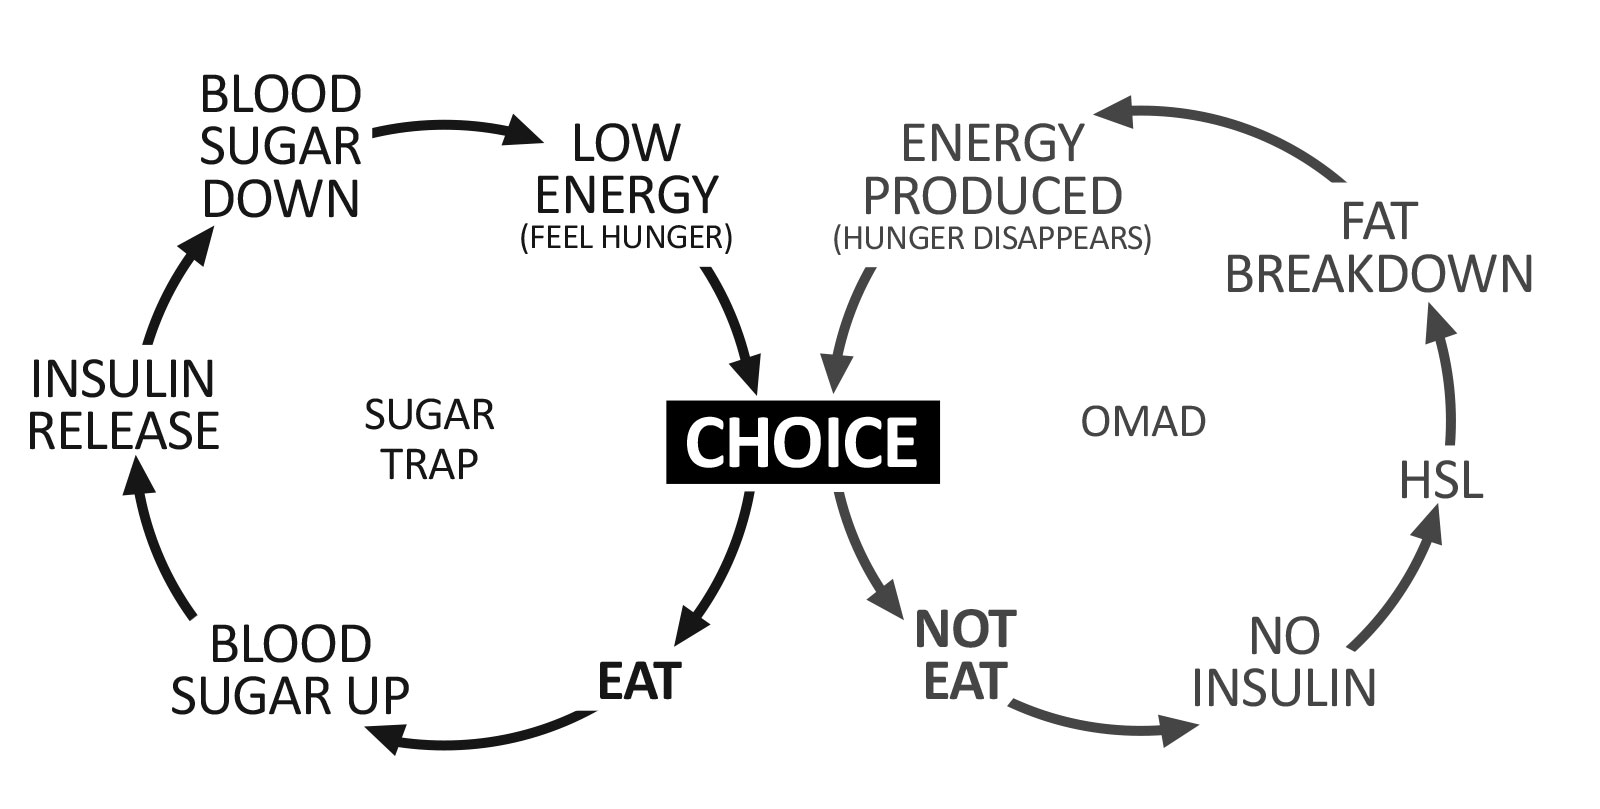 OMAD audiobook companion - The Vicious Cycle